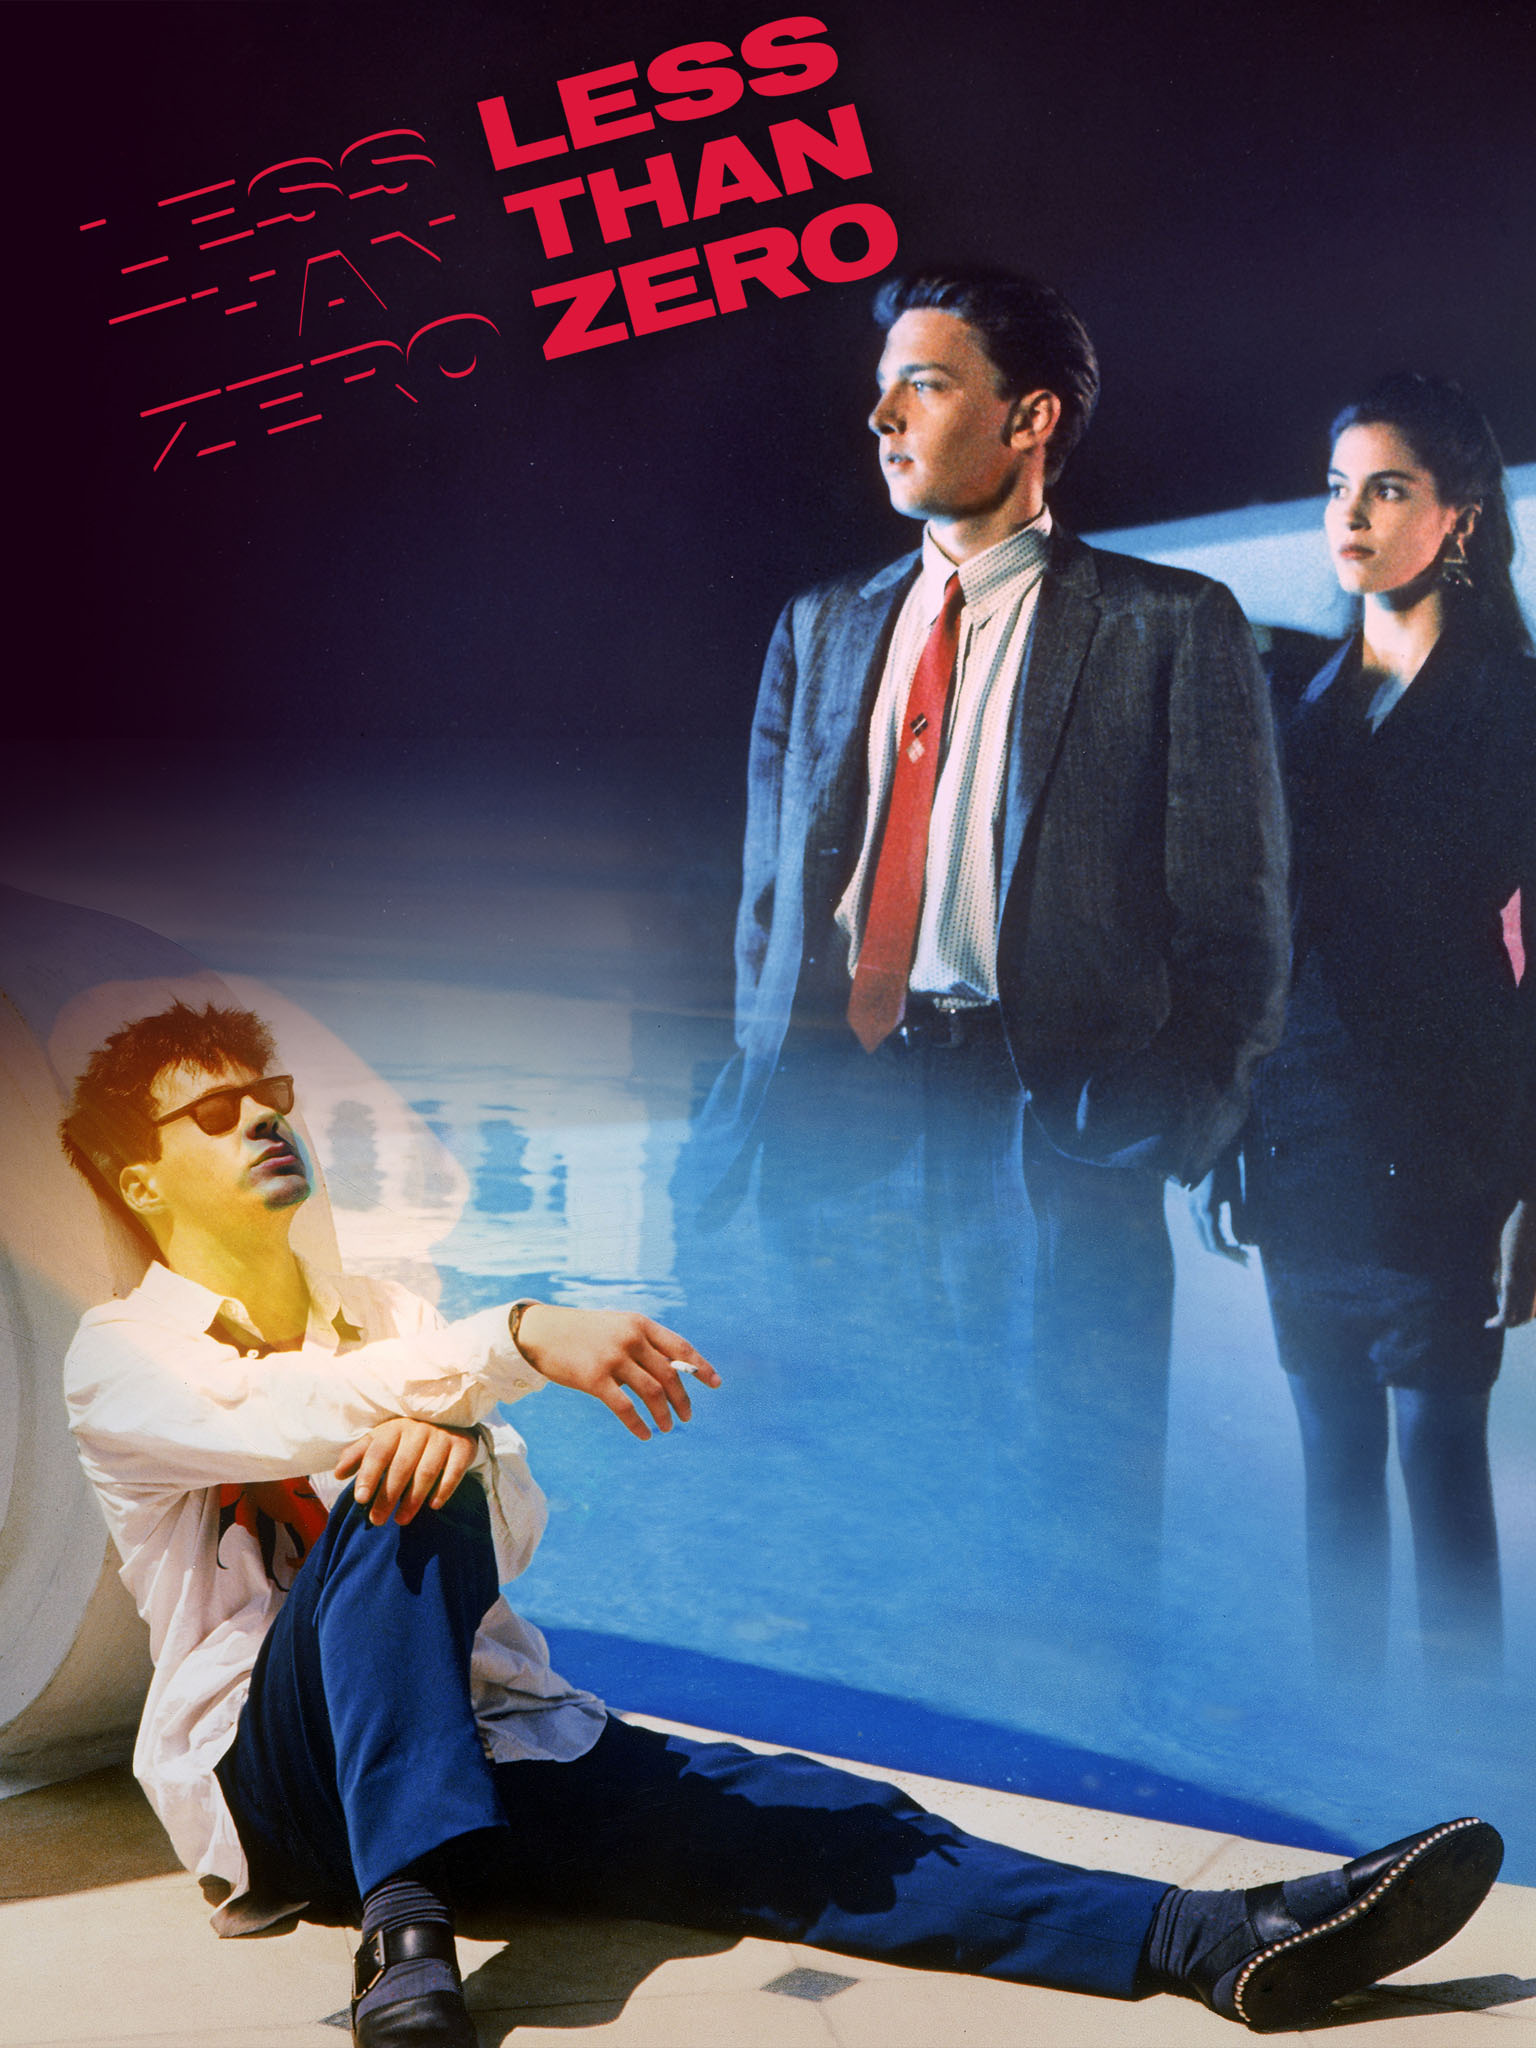 Less than Zero - Where to Watch and Stream - TV Guide